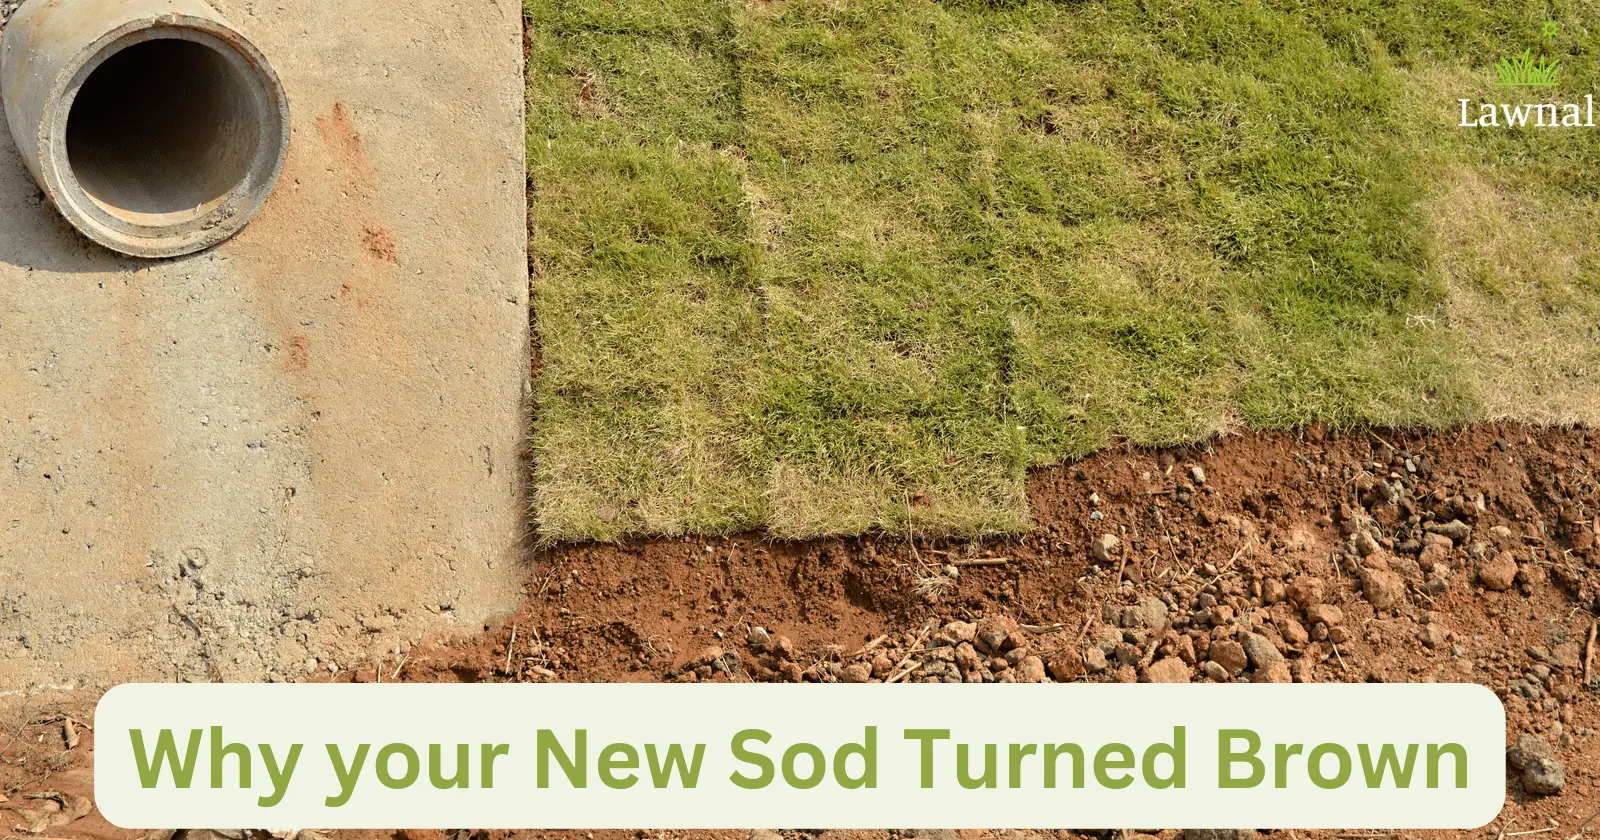 New sod turned brown